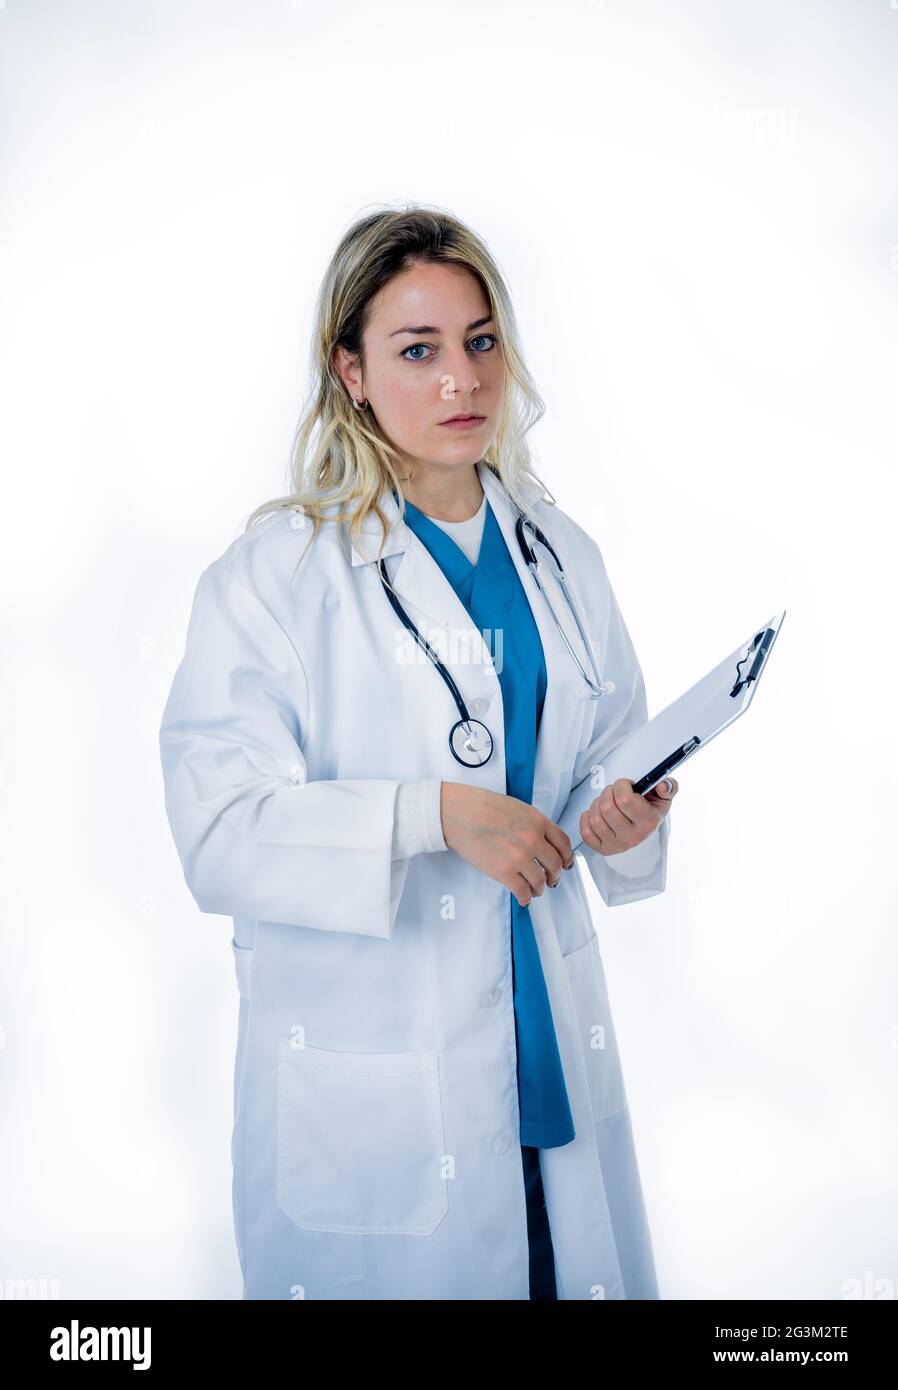 Overwhelmed female doctor or nurse wearing white coat over green scrub hospital uniform. frustrated and tired working at intensive care unit. Emotiona Stock Photo